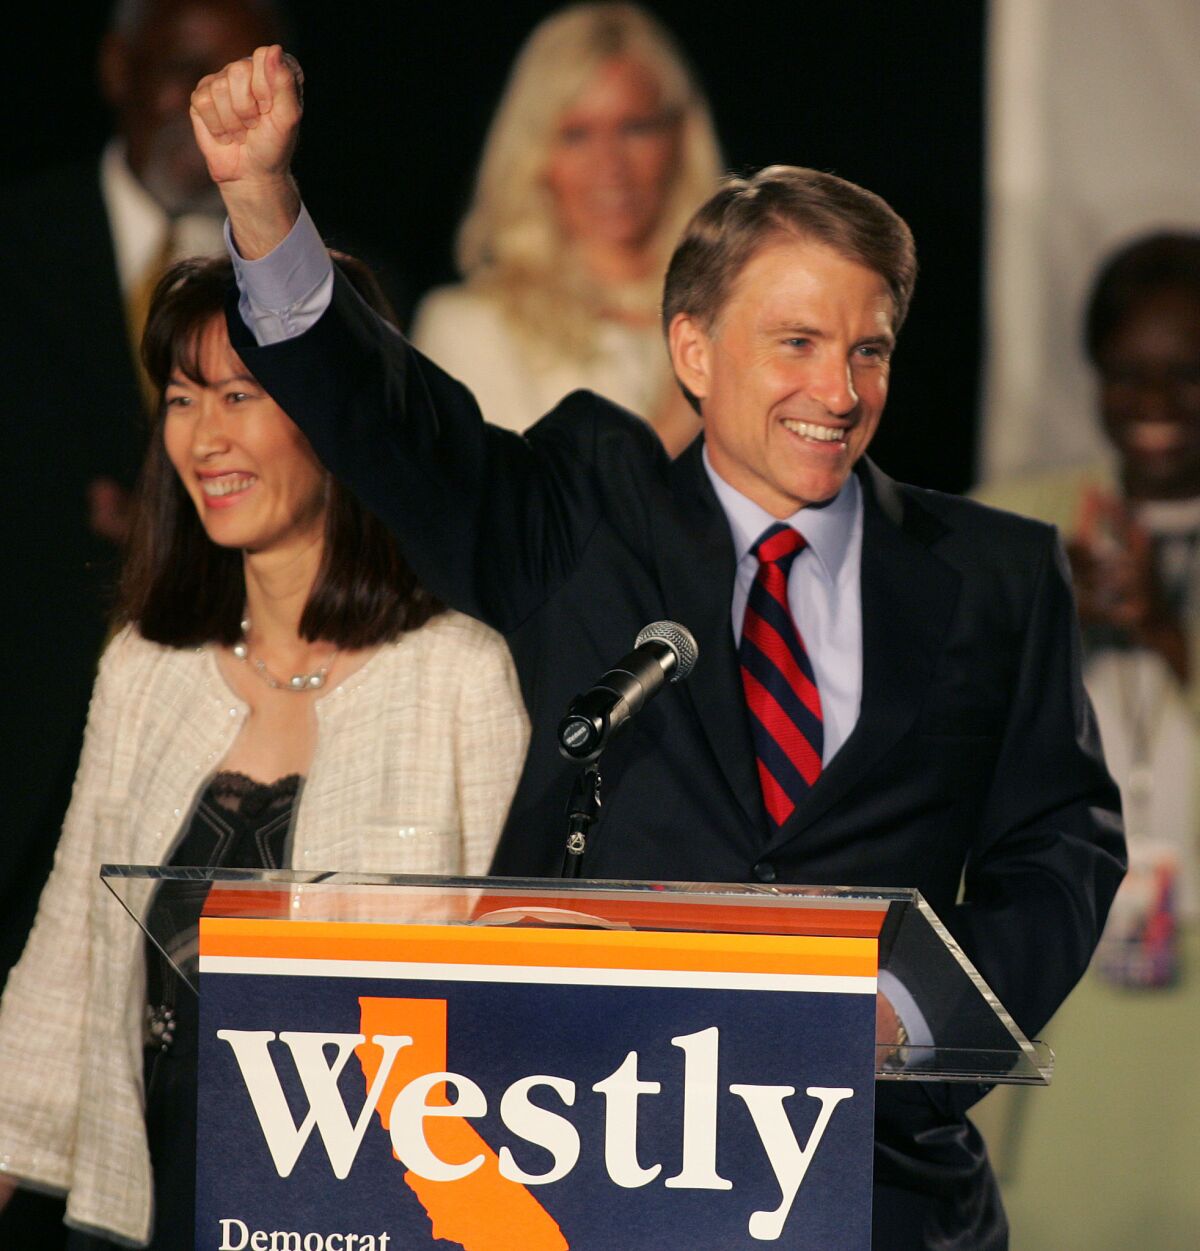 Former California gubernatorial candidate Steve Westly and his wife, Anita Yu Westly, greet his supporters on election night in 2006. Westly is again considering a run for California governor.